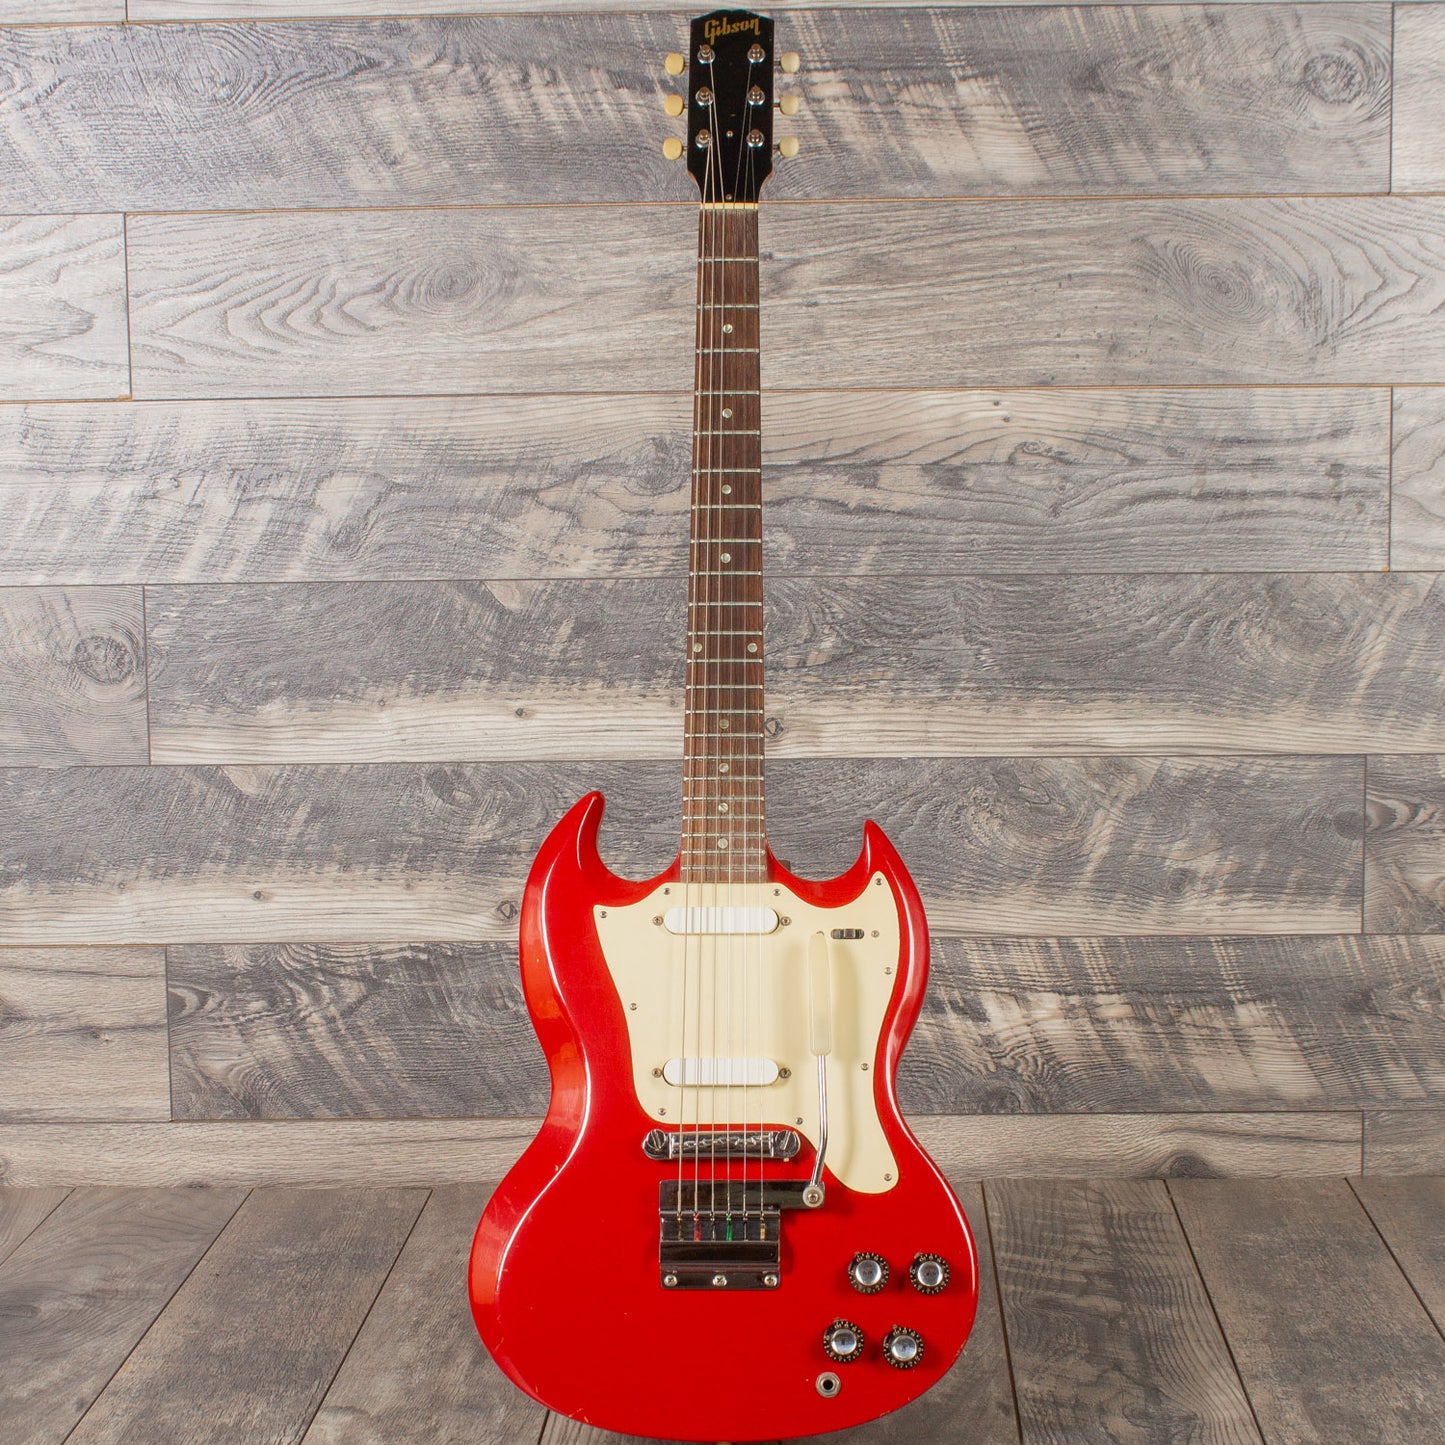 1966 Gibson Melody Maker (SG body style) with tremolo